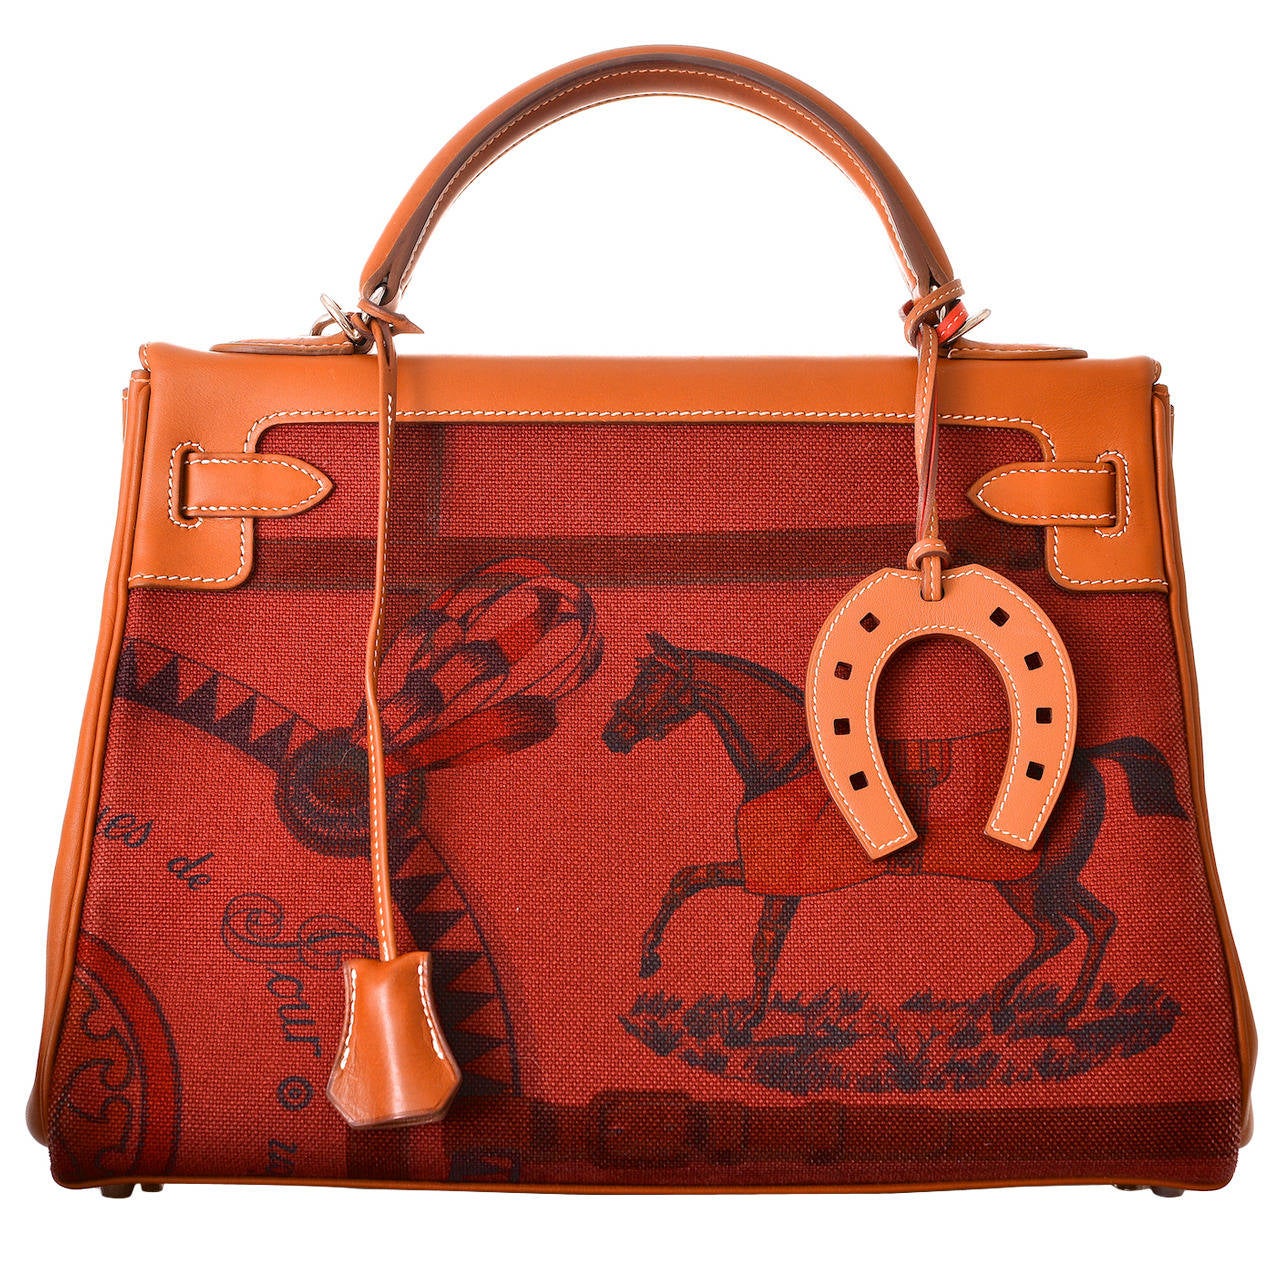 As always, another one of my fab finds!  Hermes 32cm AMAZON KELLY WITH THE MOST FABULOUS THICK SHOULDER STRAP. Palladium hardware!
SPECIAL EDITION FAUVE BARENIA WITH GORGEOUS ROUGE H TOILE HORSE PRINT!

This bag is PRE-LOVED  with original box